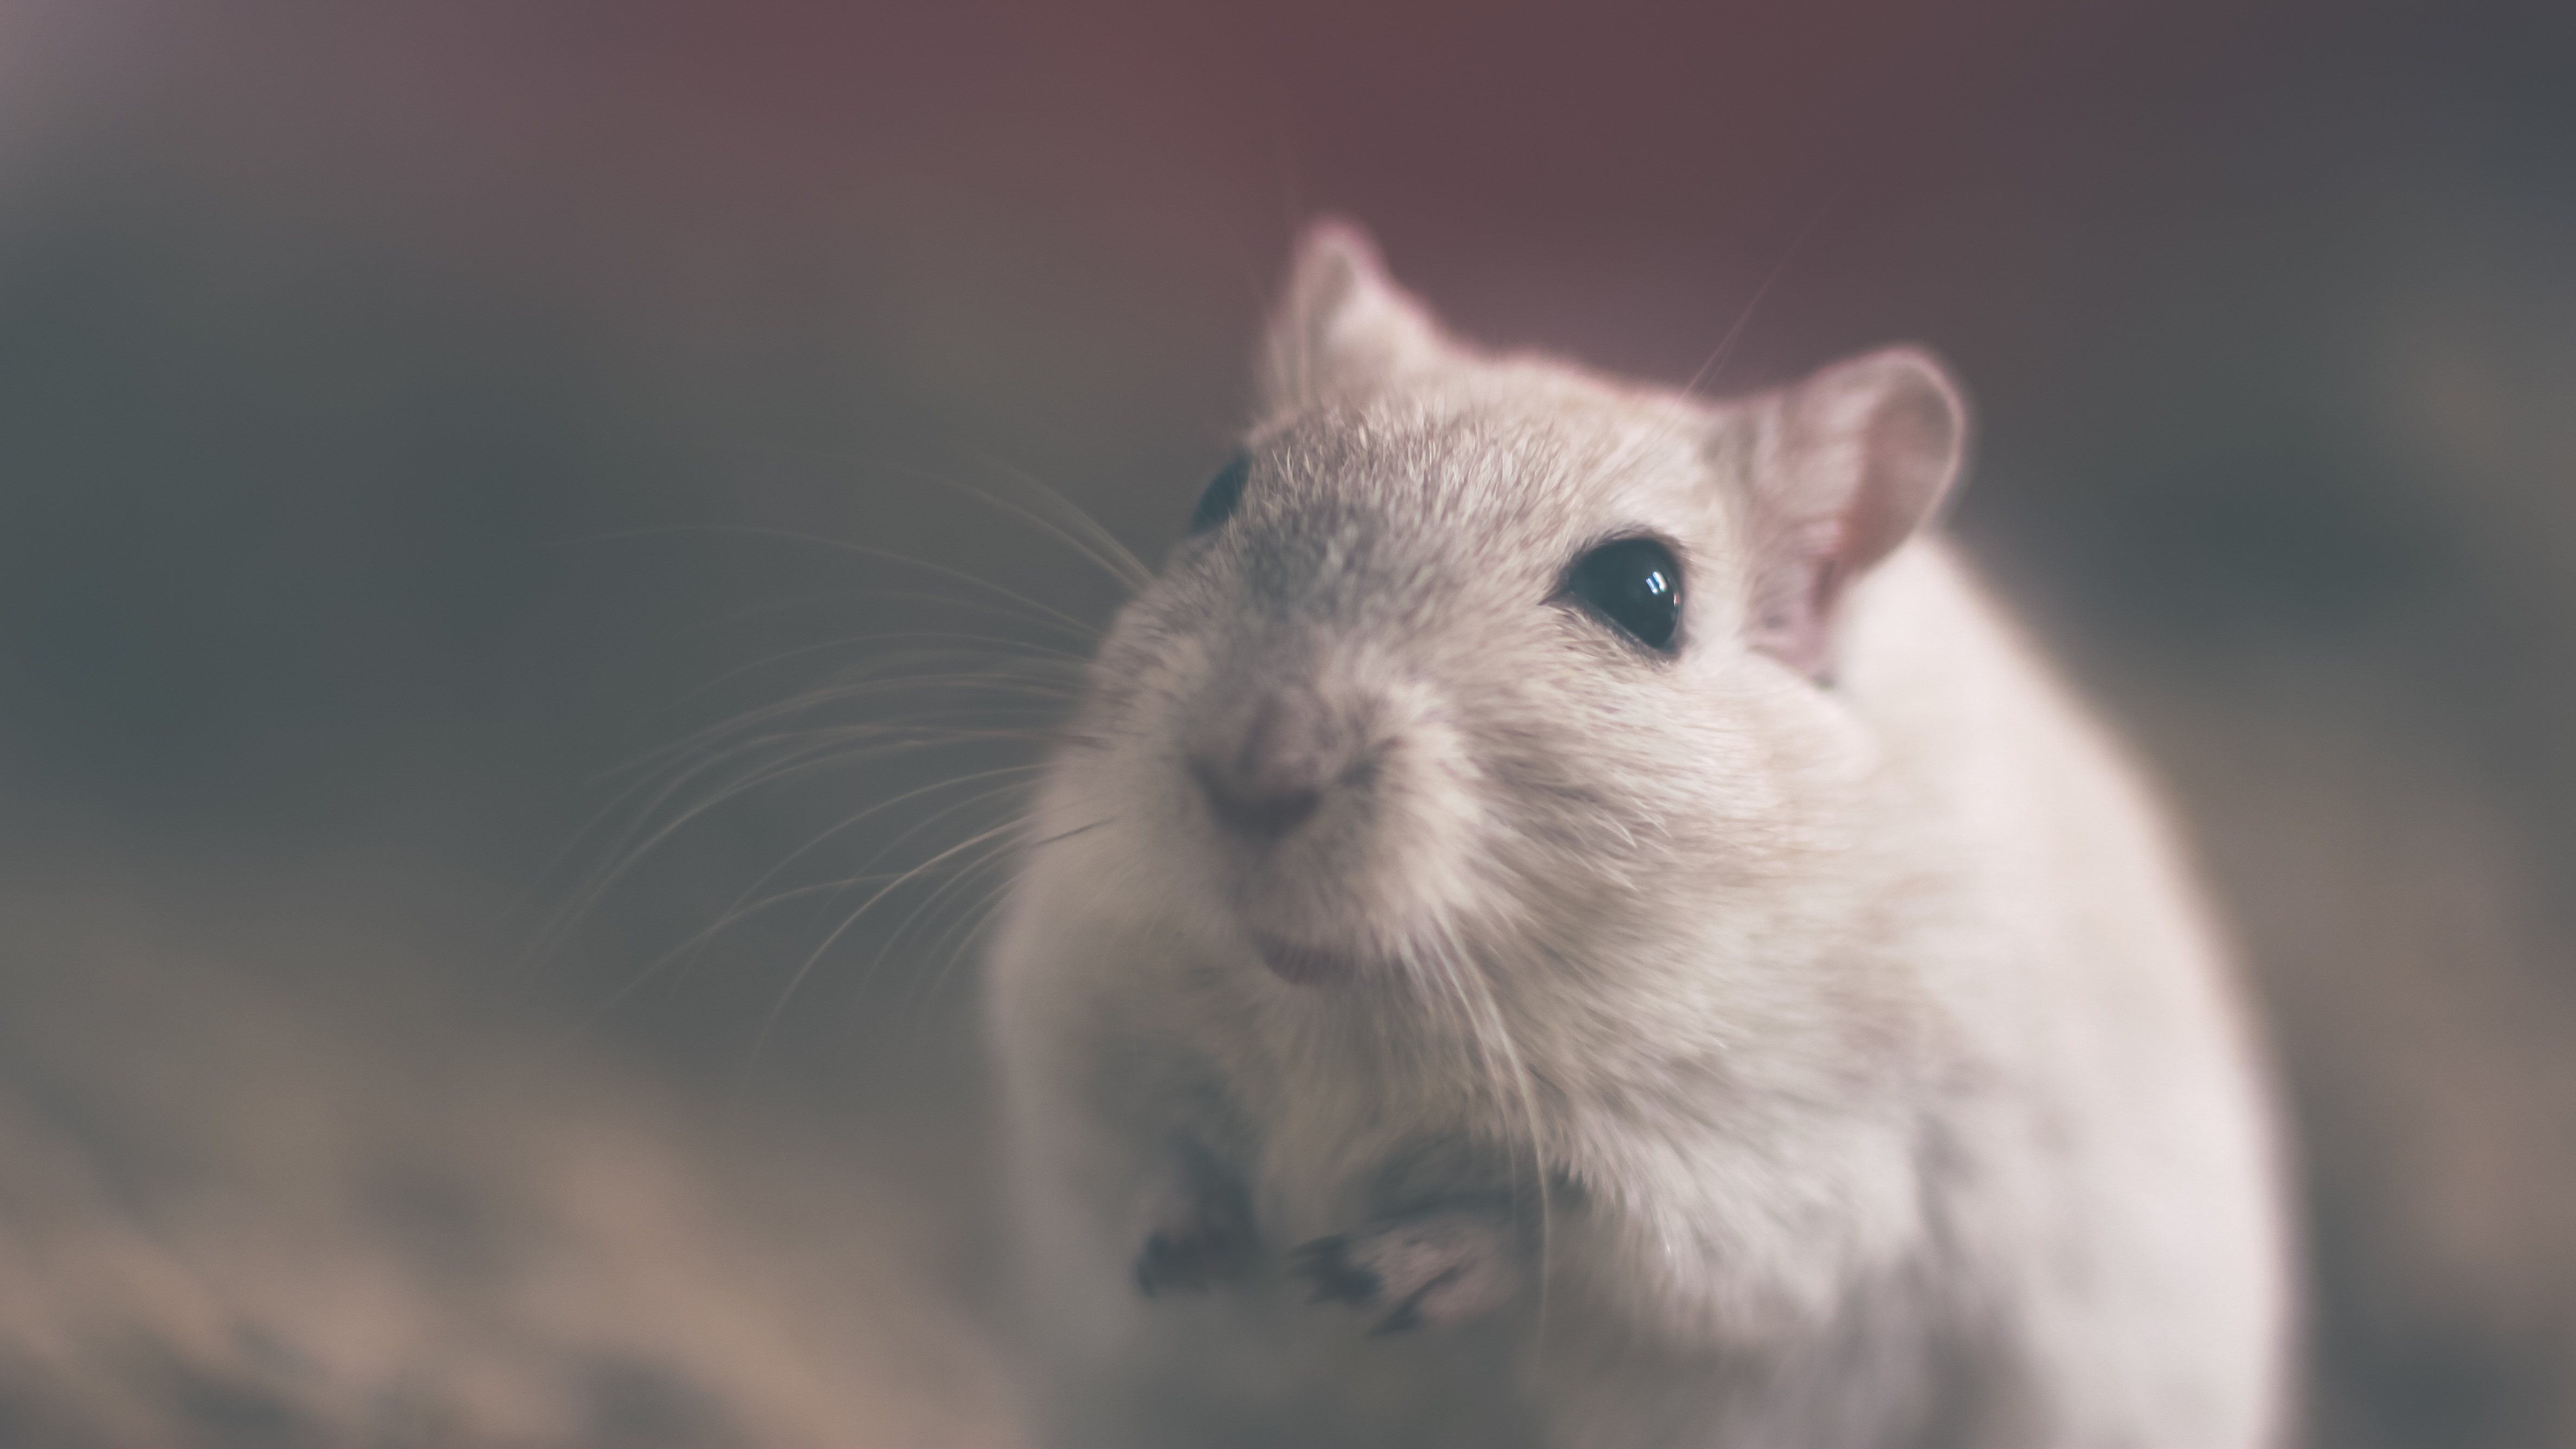 SUPER MICE THAT SNIFF OUT LANDMINES